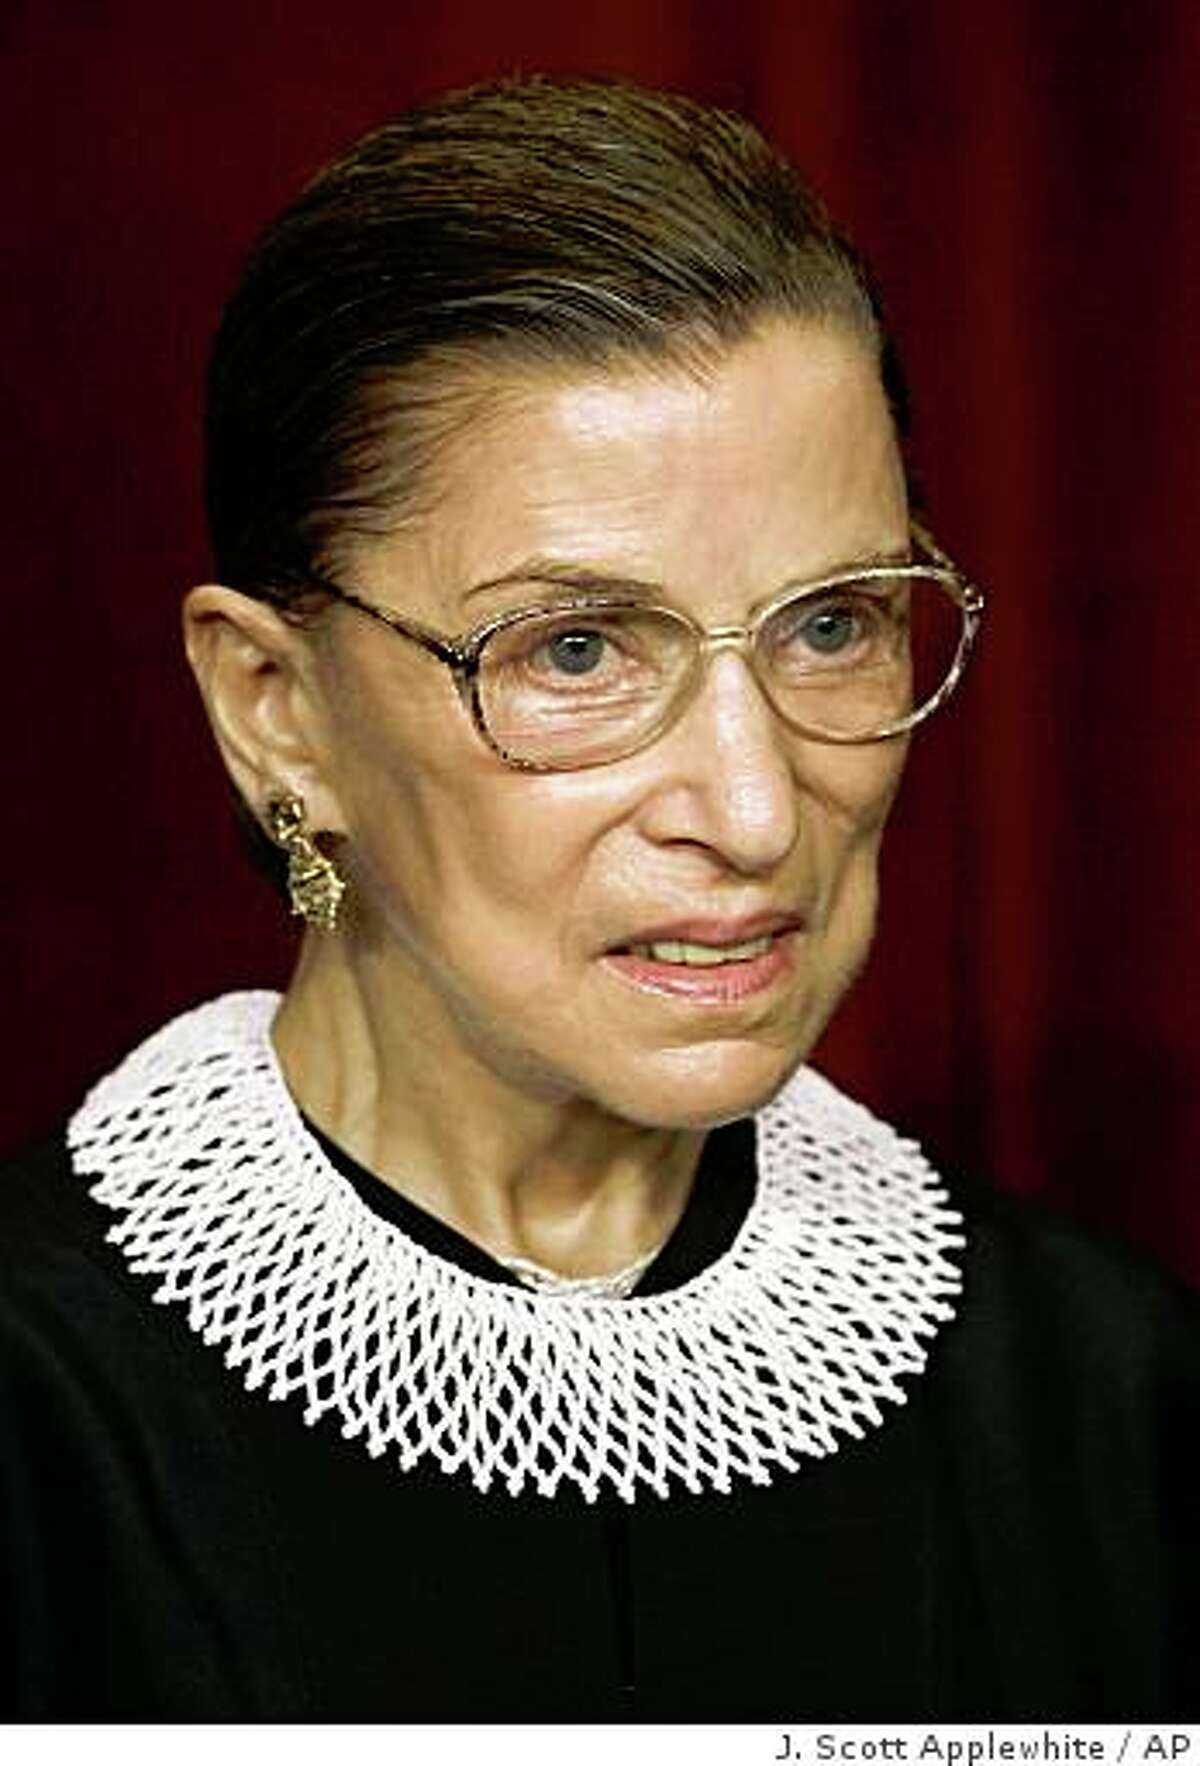 Associate Justice Ruth Bader Ginsburg joins the members of the Supreme Court for photos during a group portrait session, at the Supreme Court Building in Washington, Friday, March 3, 2006.. President Clinton nominated her as an Associate Justice of the Supreme Court, and she took her seat Aug. 10, 1993. (AP Photo/J. Scott Applewhite)Ran on: 03-19-2006